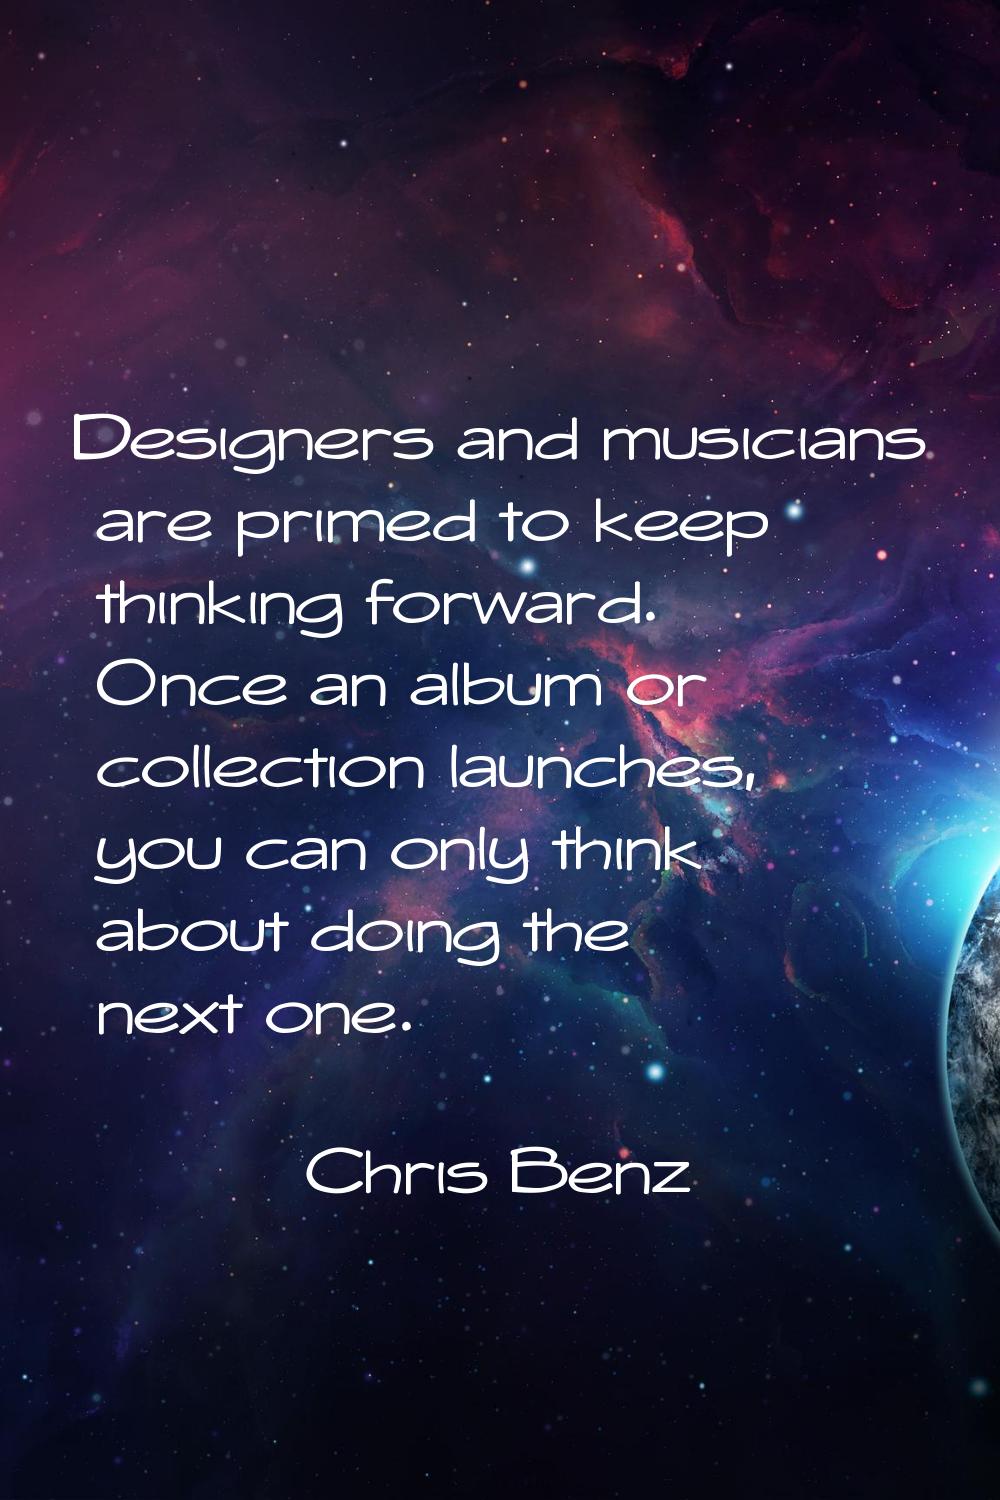 Designers and musicians are primed to keep thinking forward. Once an album or collection launches, 